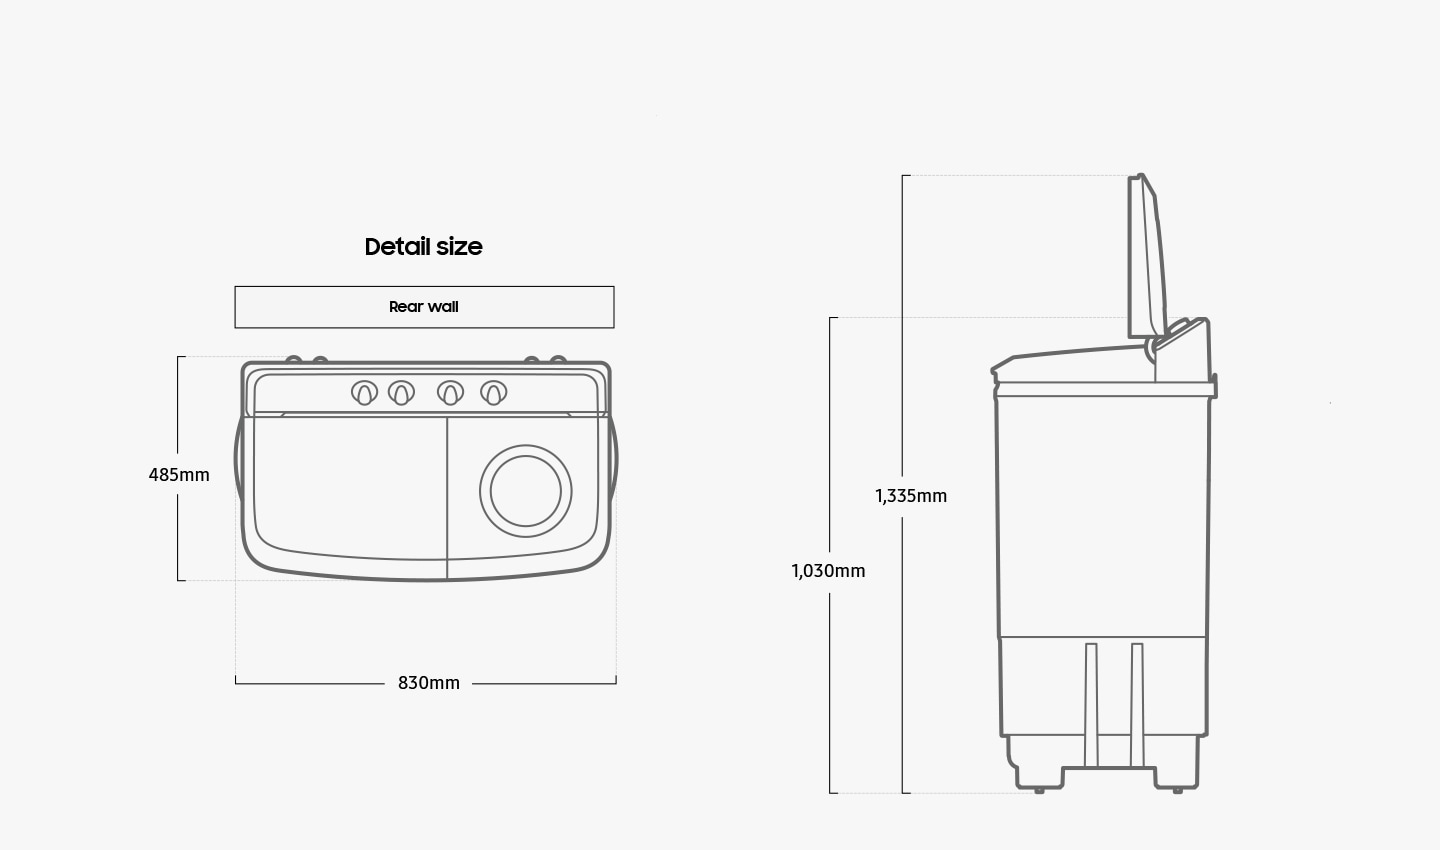 The Washer is 830mm wide, 485mm deep, and 1,030mm tall. The height with door opened to 90 degrees is 1,335mm.